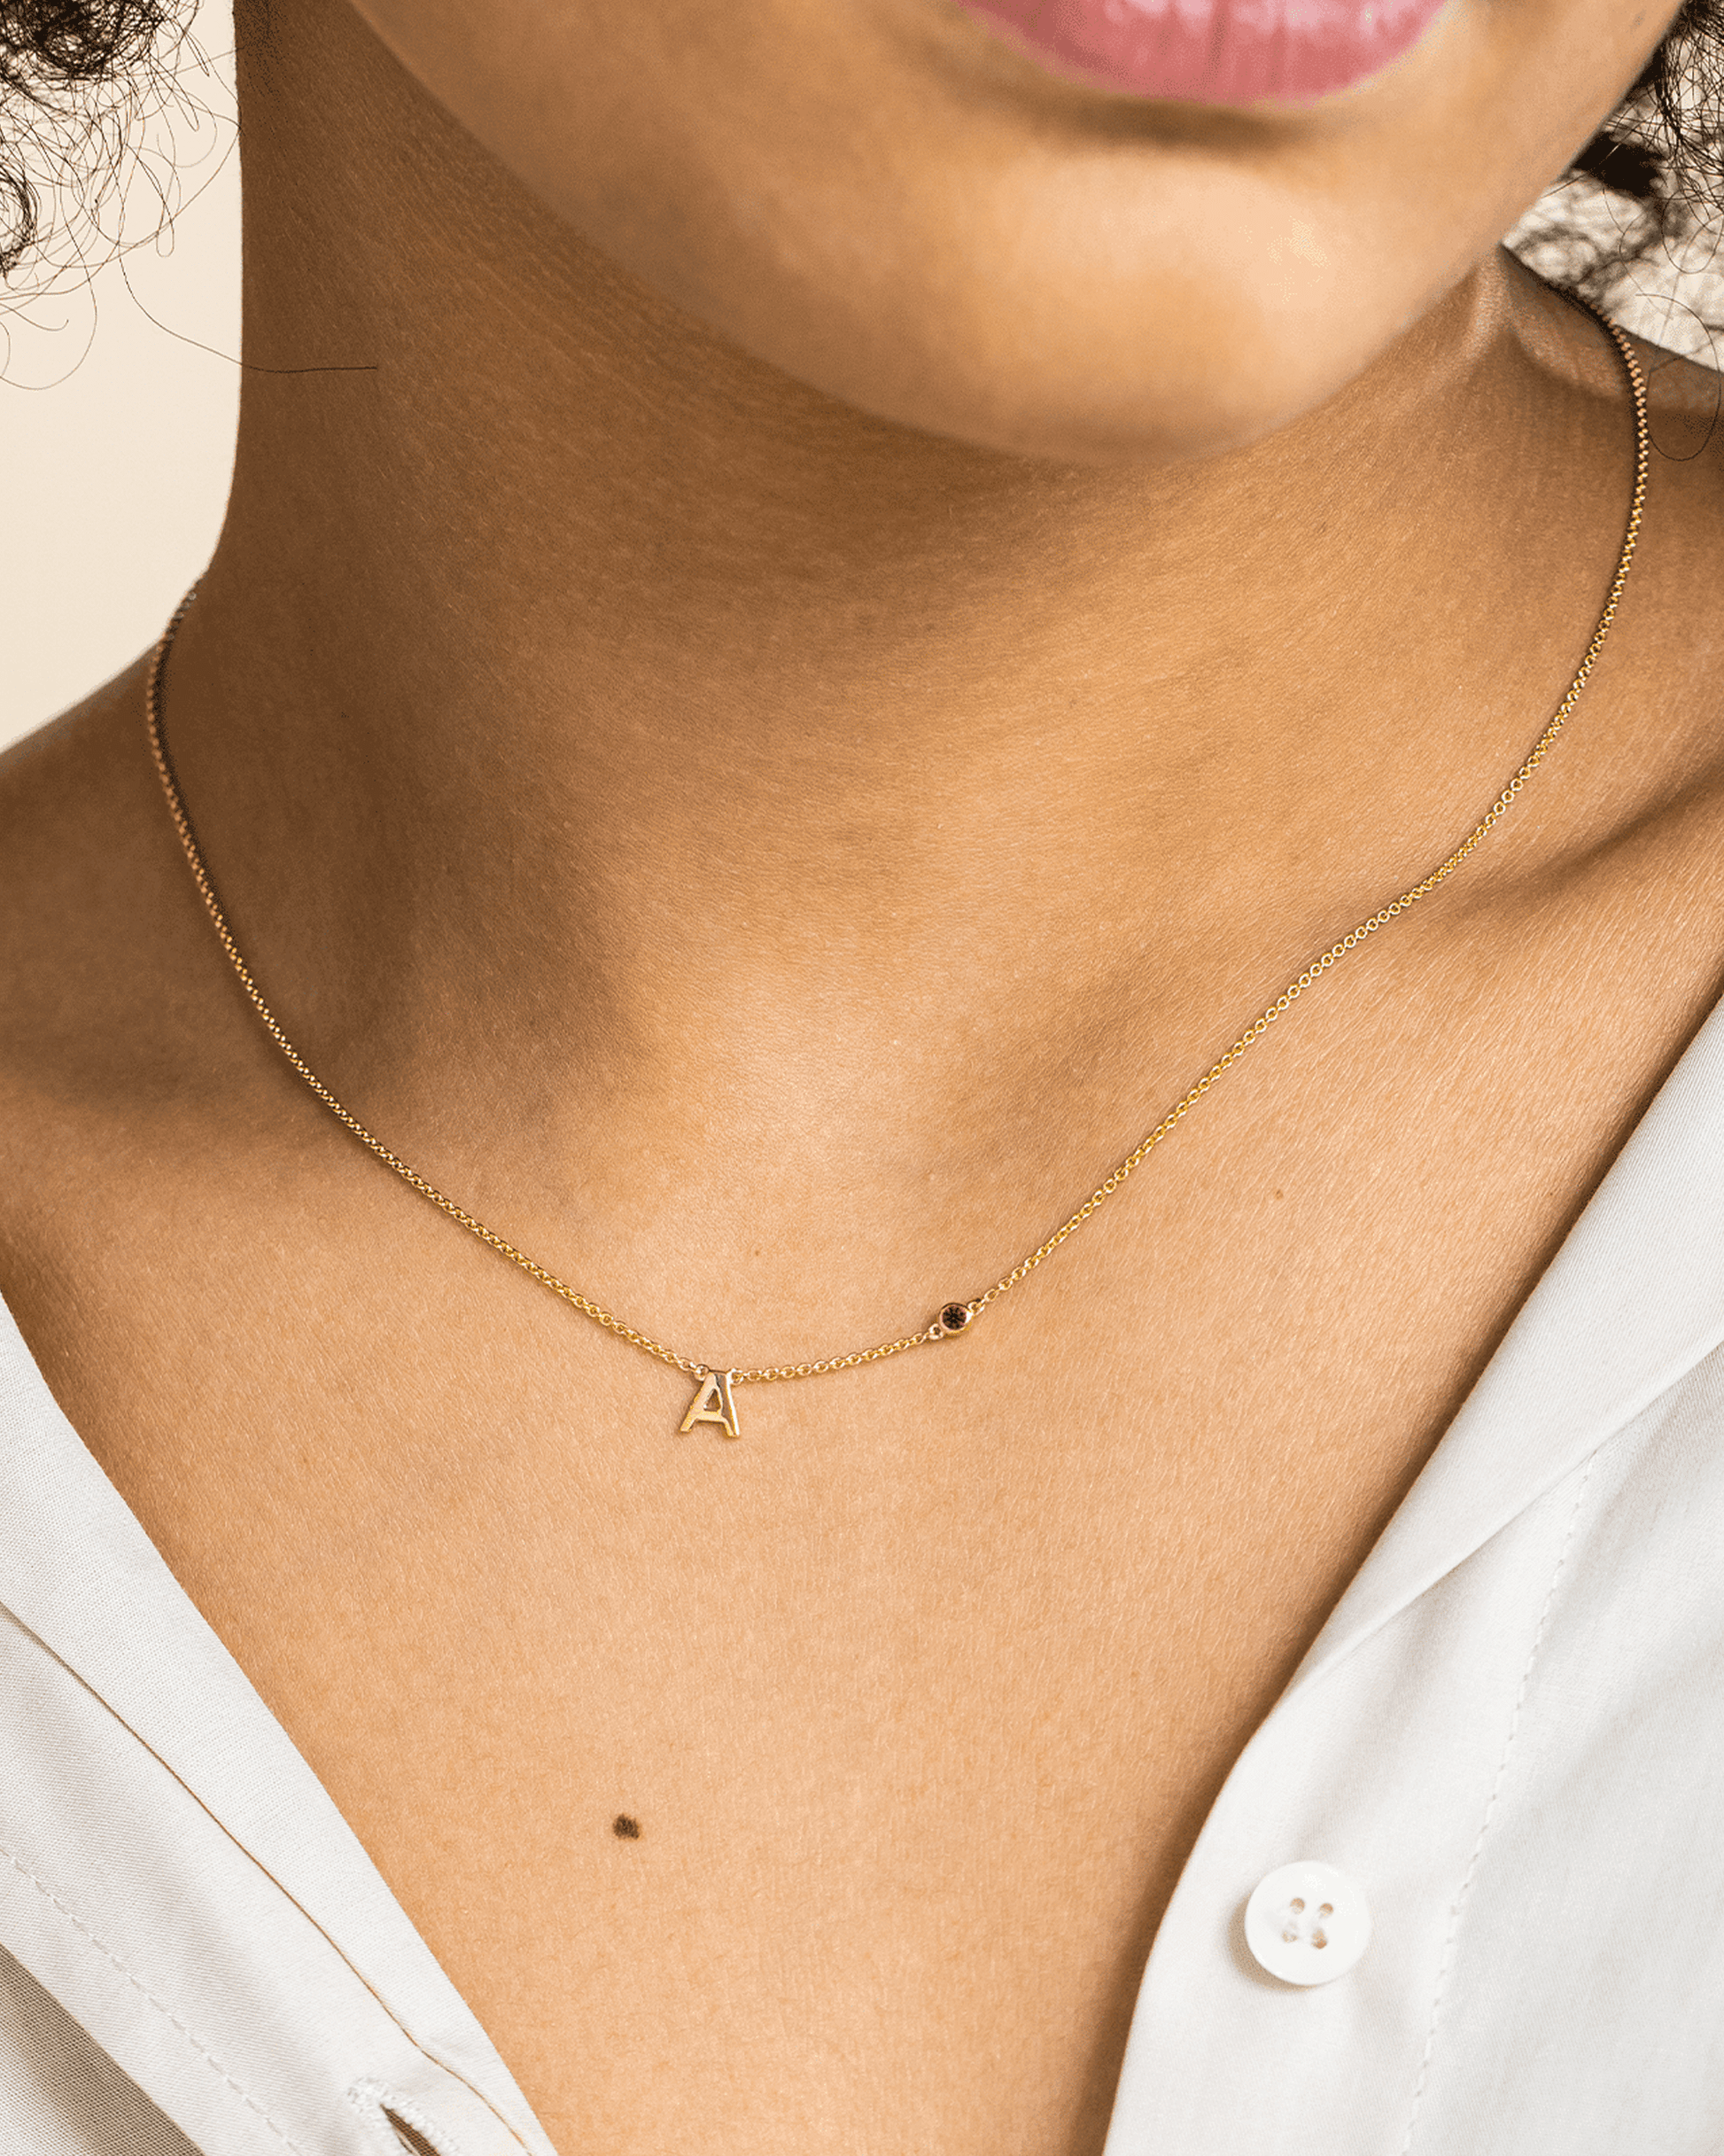 Initial Birthstone Necklace - 14K White Gold Necklaces magal-dev 